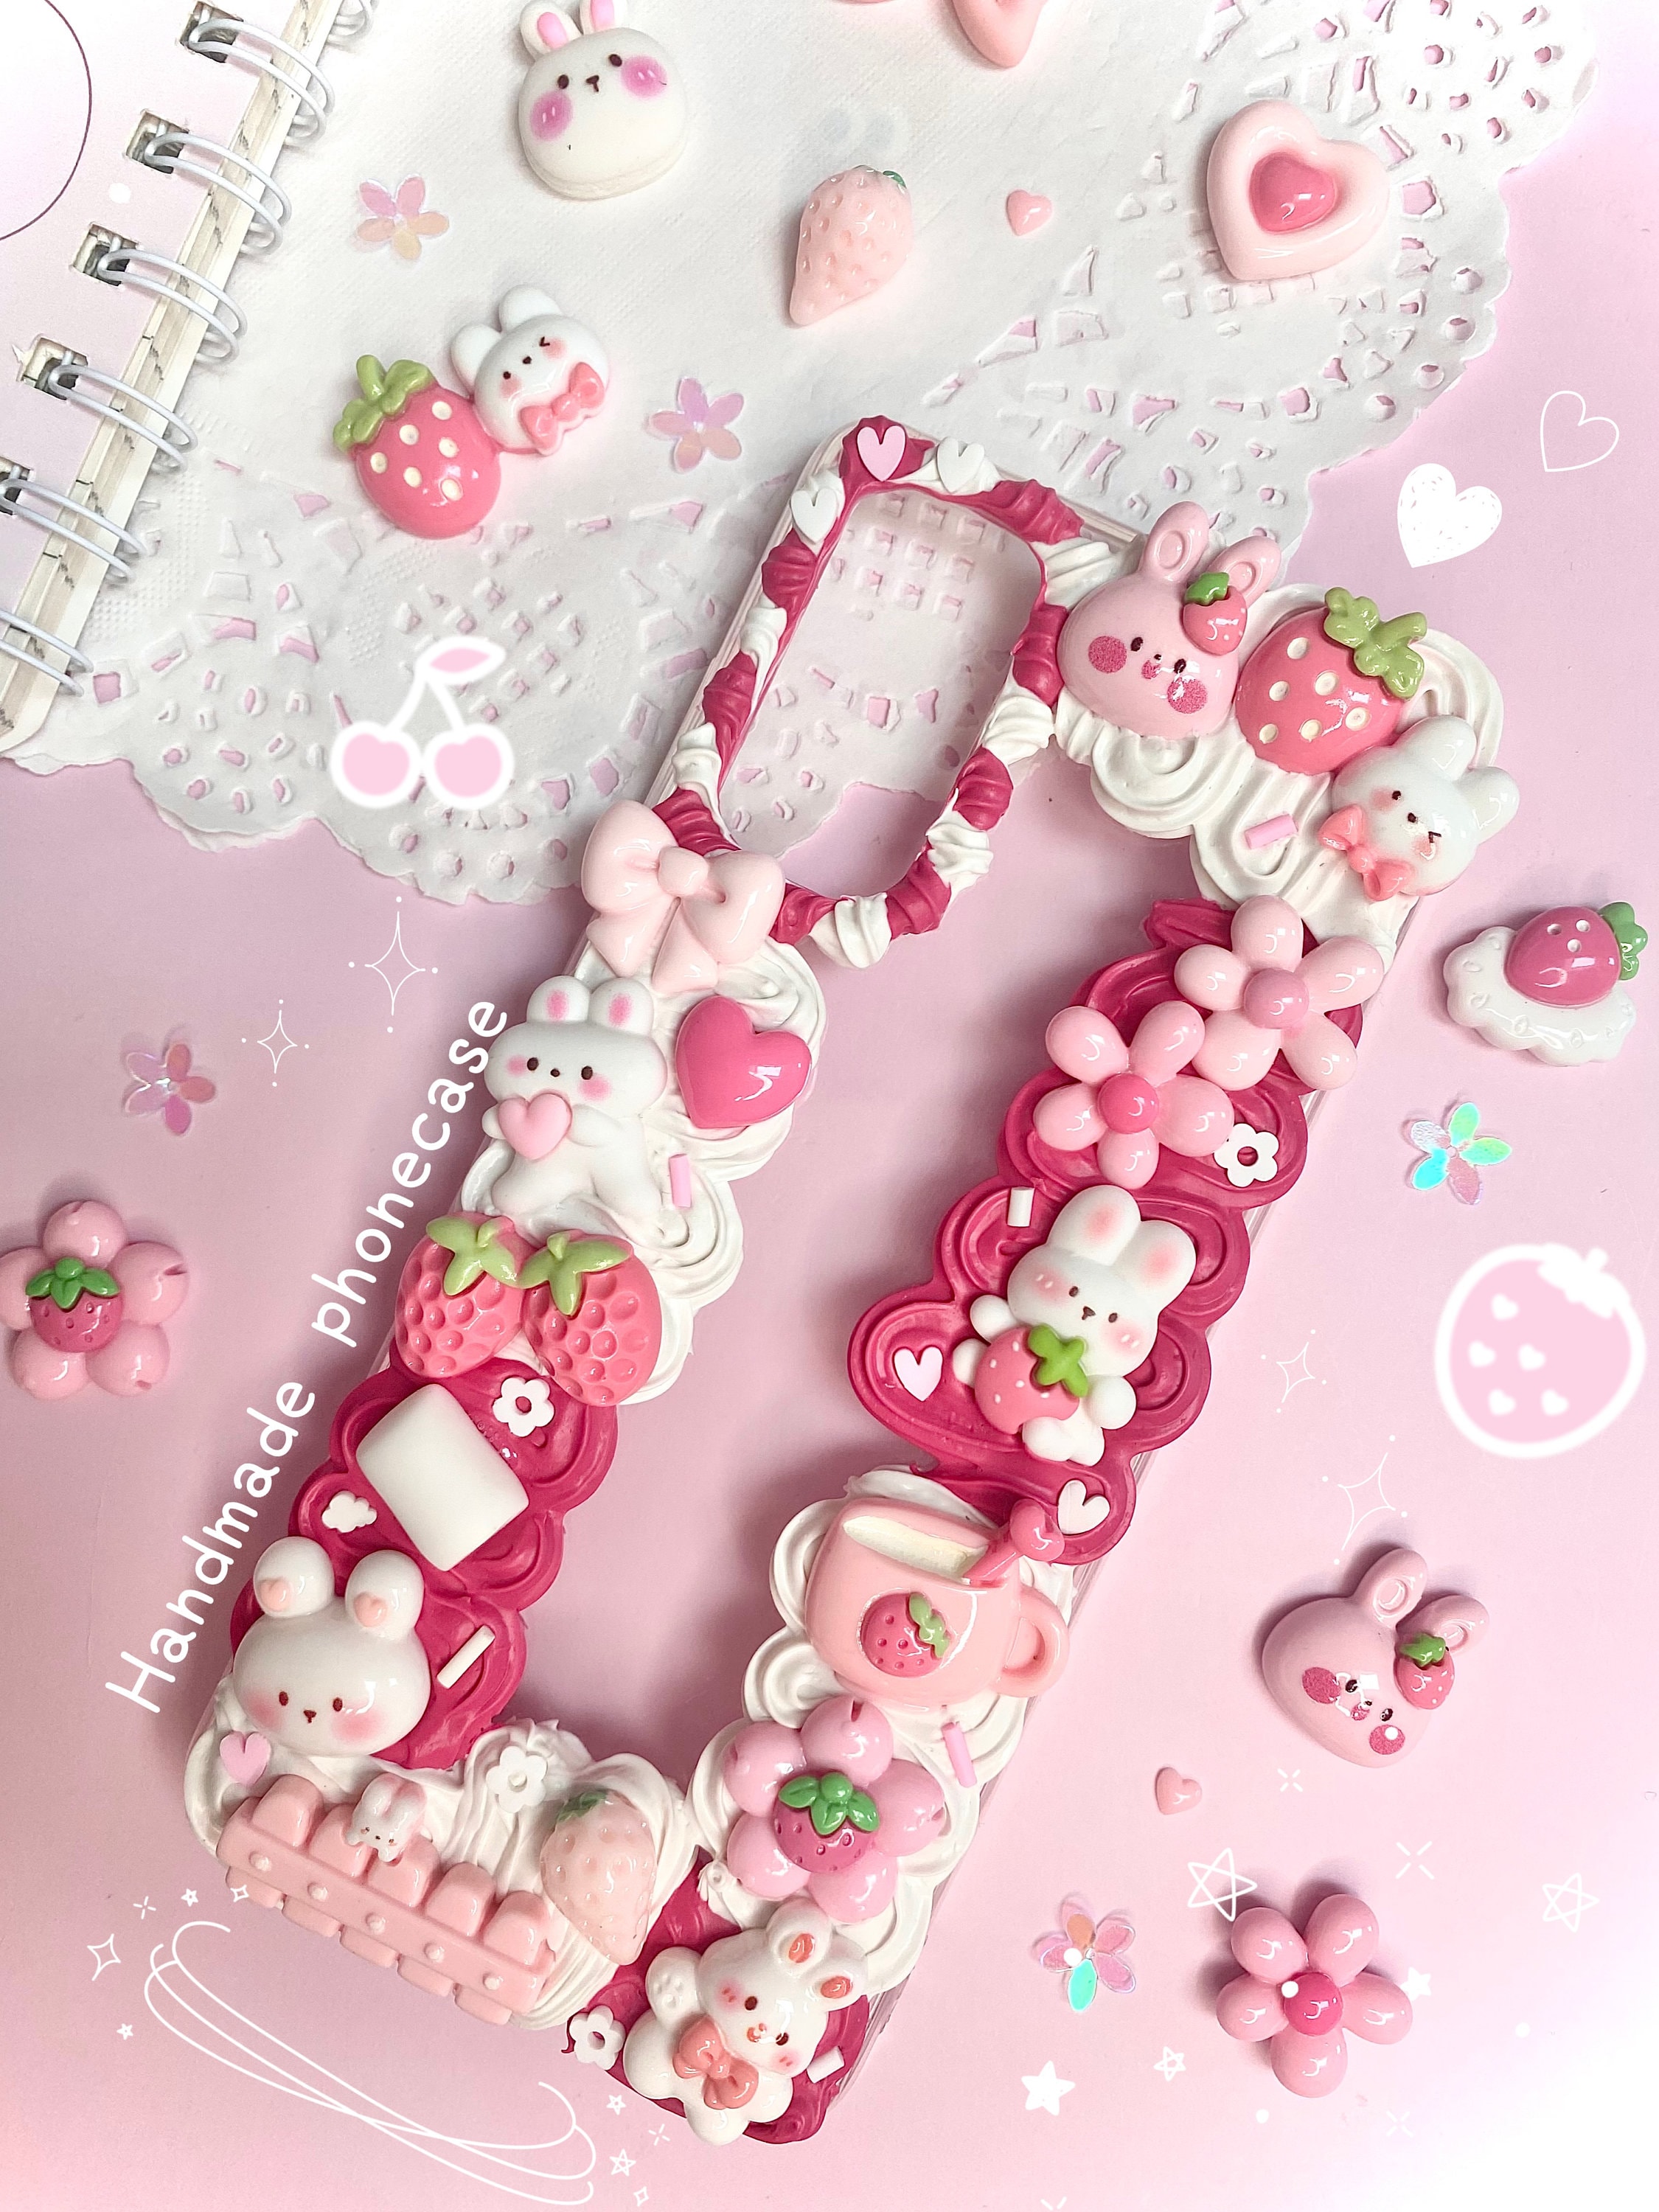 Decoden Cream Glue and Charms Kit ,decoden Kits for Beginners, Decoden  Cream Glue, Decoden Charms,decoden Projects,diy Kits 